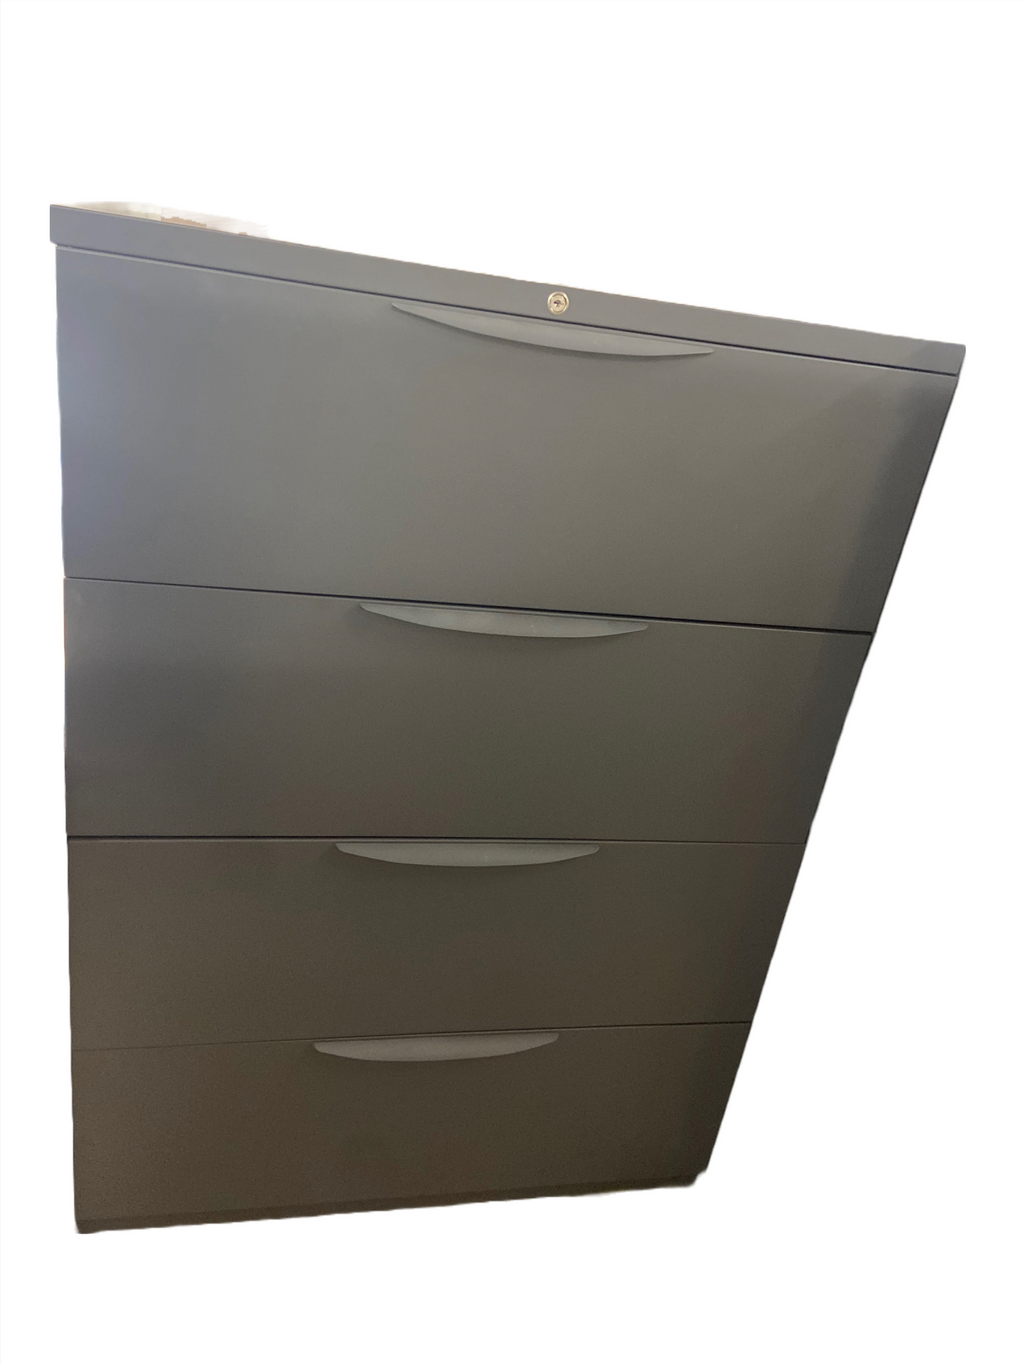 Pre-Owned Lateral File Cabinet by Haworth